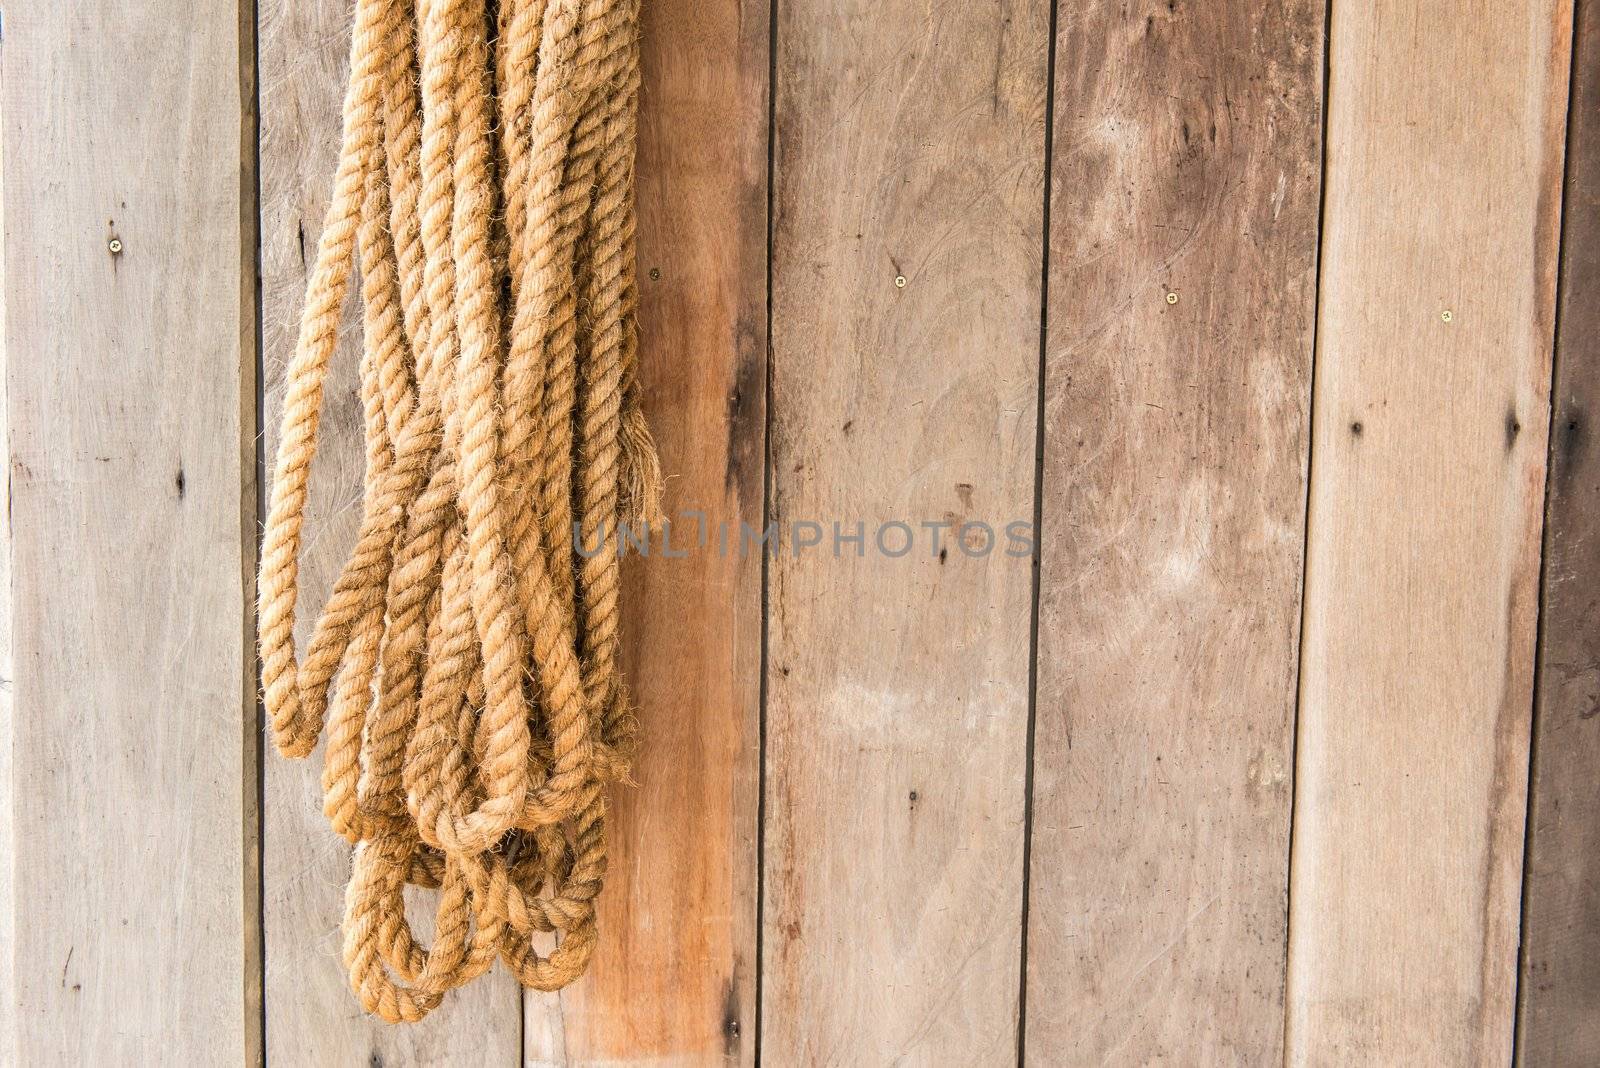 Large cow boy rope hanging with wooden background texture, taken outdoor